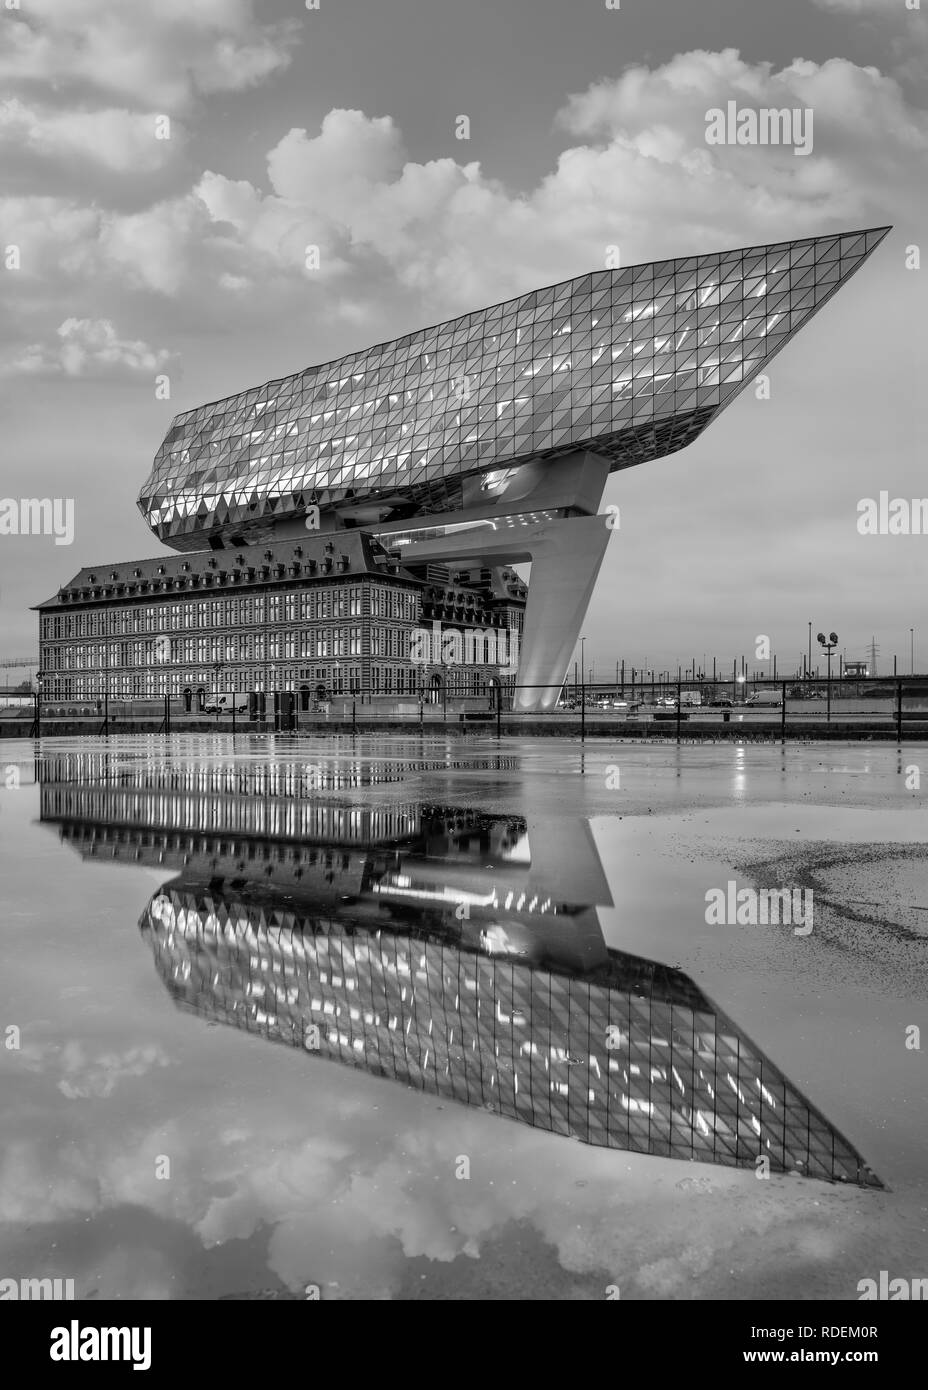 Antwerp Port headquarters. Zaha Hadid Architects added a glass extension to a renovated fire station. Stock Photo